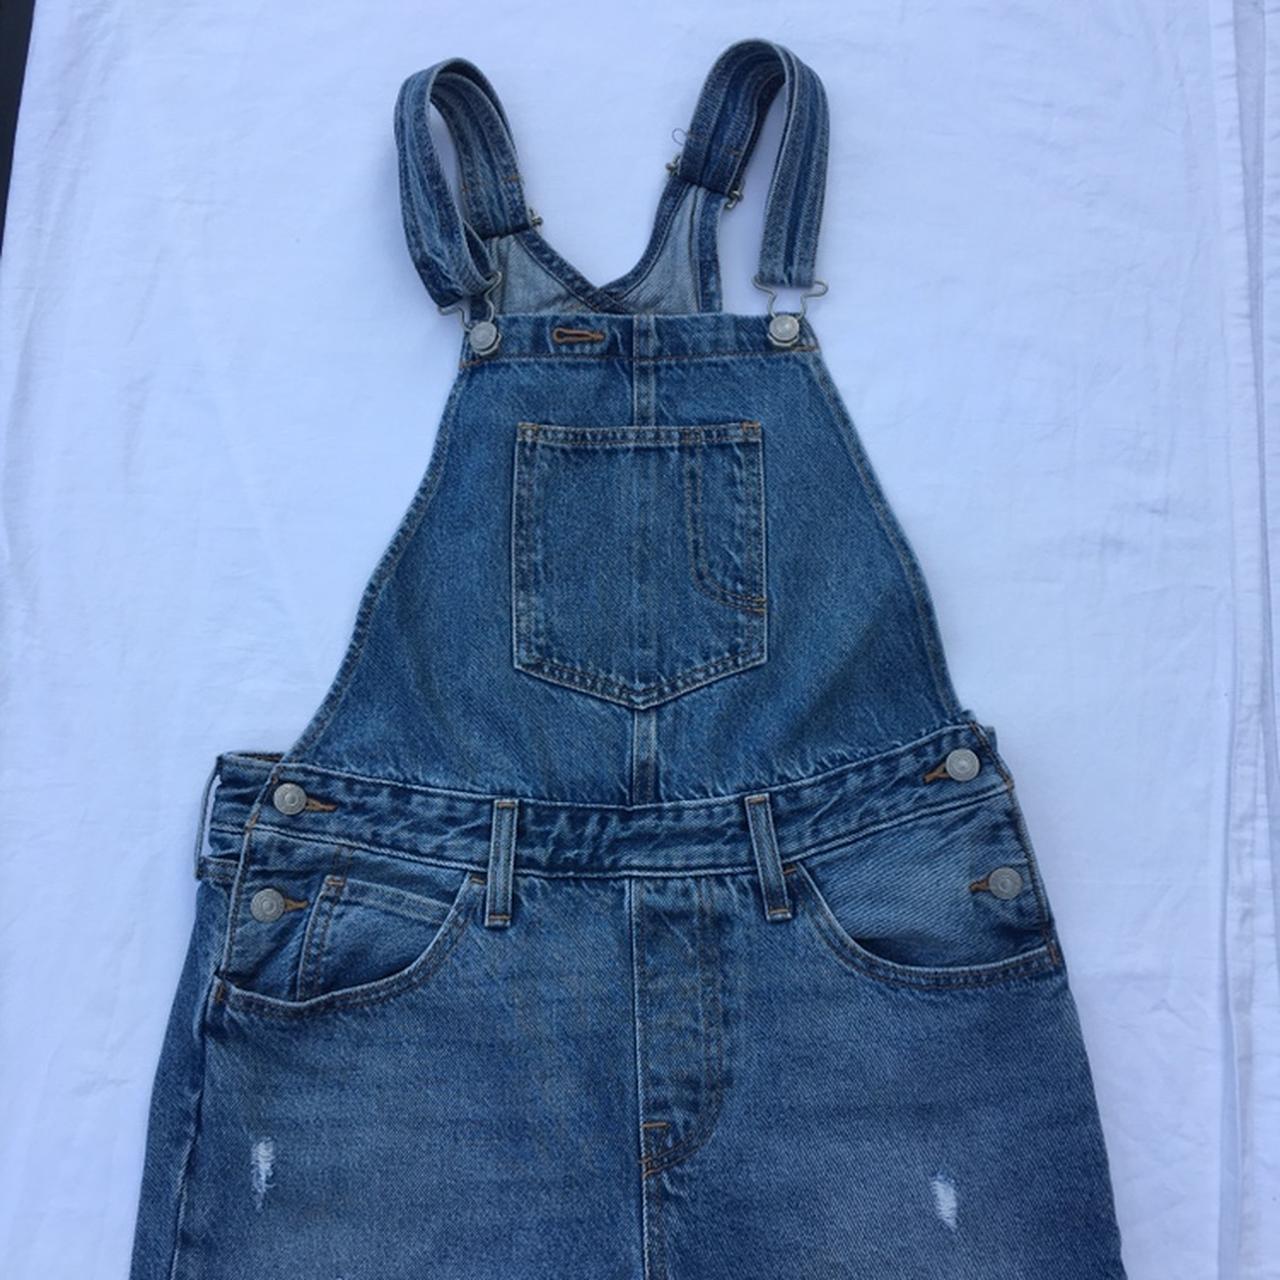 Woww Original Levi’s Dungarees (Overalls) from US!... - Depop